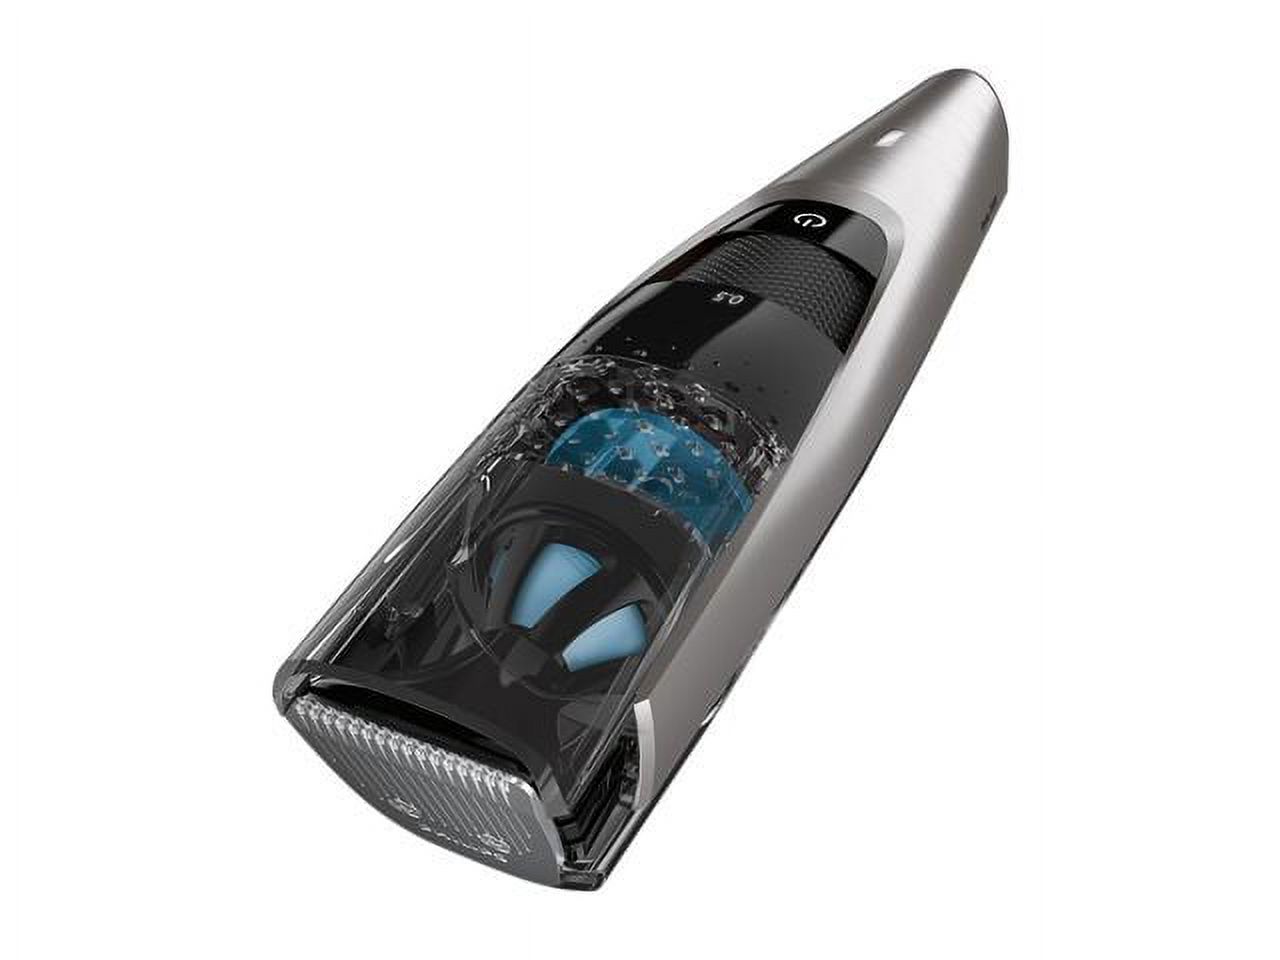 Philips Norelco Beard Trimmer Vacuum w 20 Length Settings, BT7215/49 - image 4 of 11